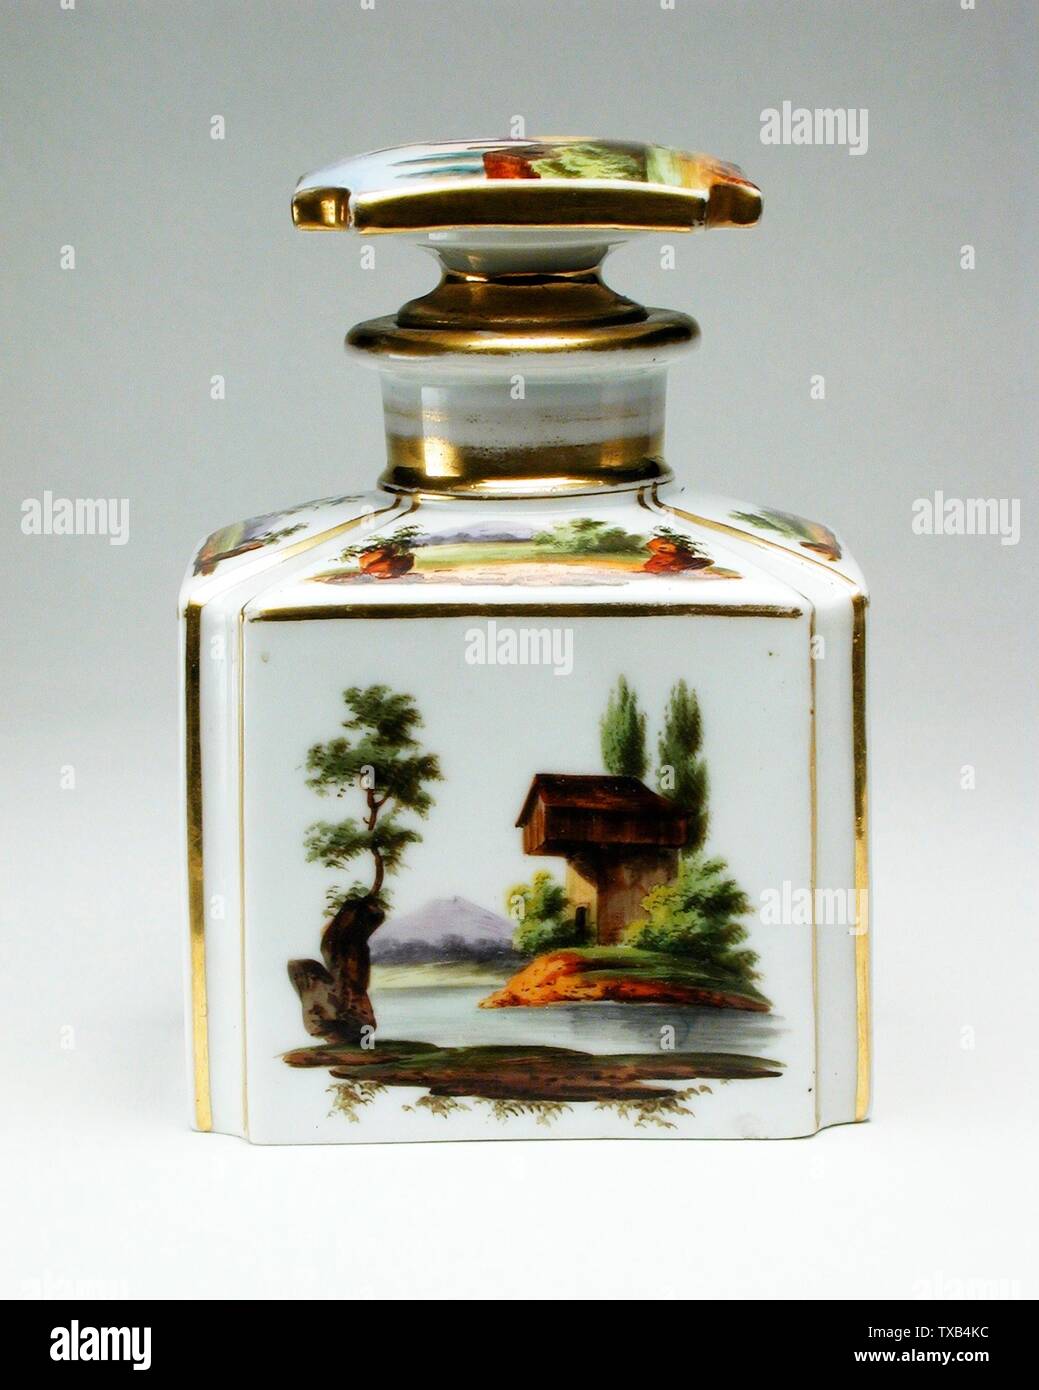 Pair of Perfume Bottles (image 6 of 6);  France, 18th century Furnishings; Accessories Porcelain, gilding Gift of Catherine C. Hearst (M.80.205.19-.20) Decorative Arts and Design; 18th century date QS:P571,+1750-00-00T00:00:00Z/7; Stock Photo